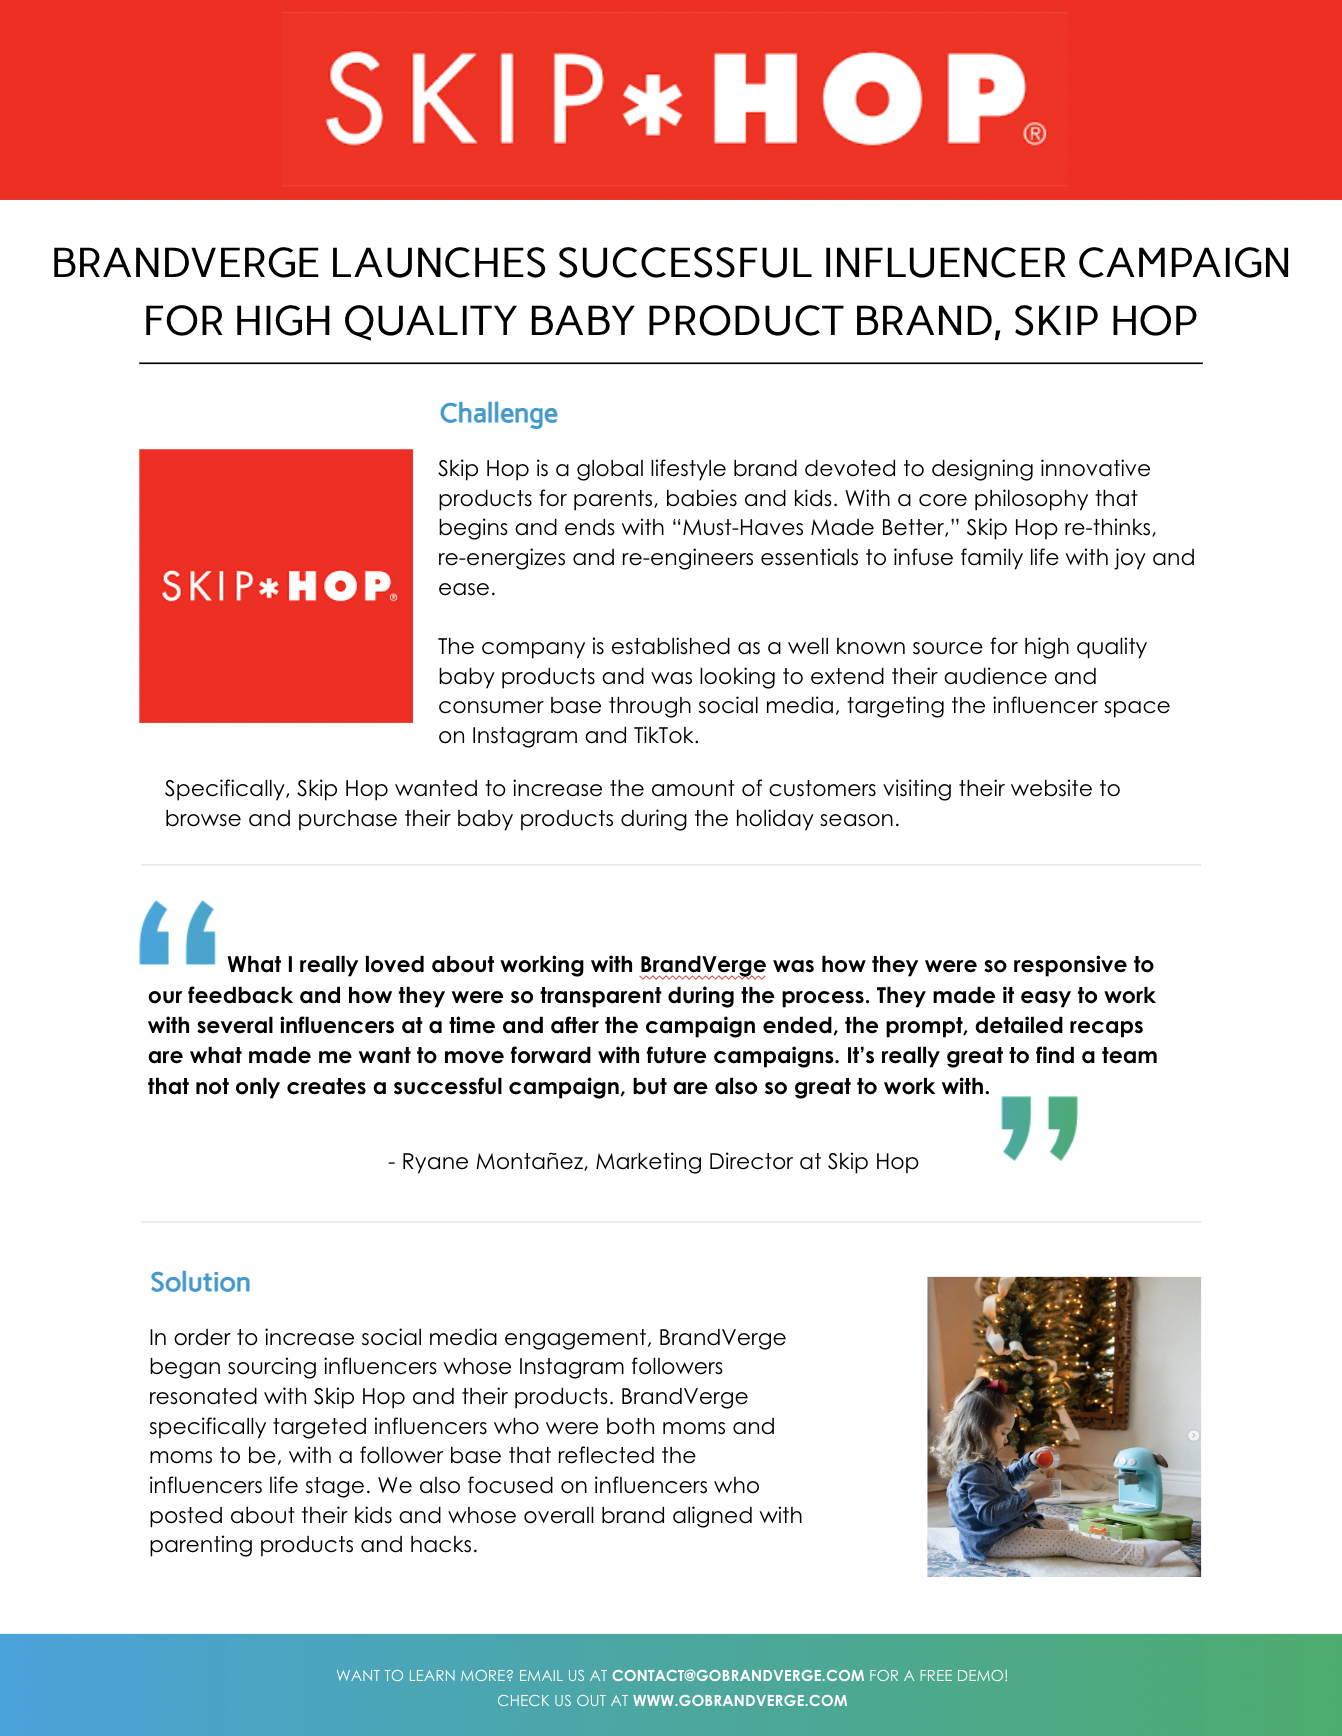 BRANDVERGE LAUNCHES SUCCESSFUL INFLUENCER CAMPAIGN FOR HIGH QUALITY BABY PRODUCT BRAND, SKIP HOP